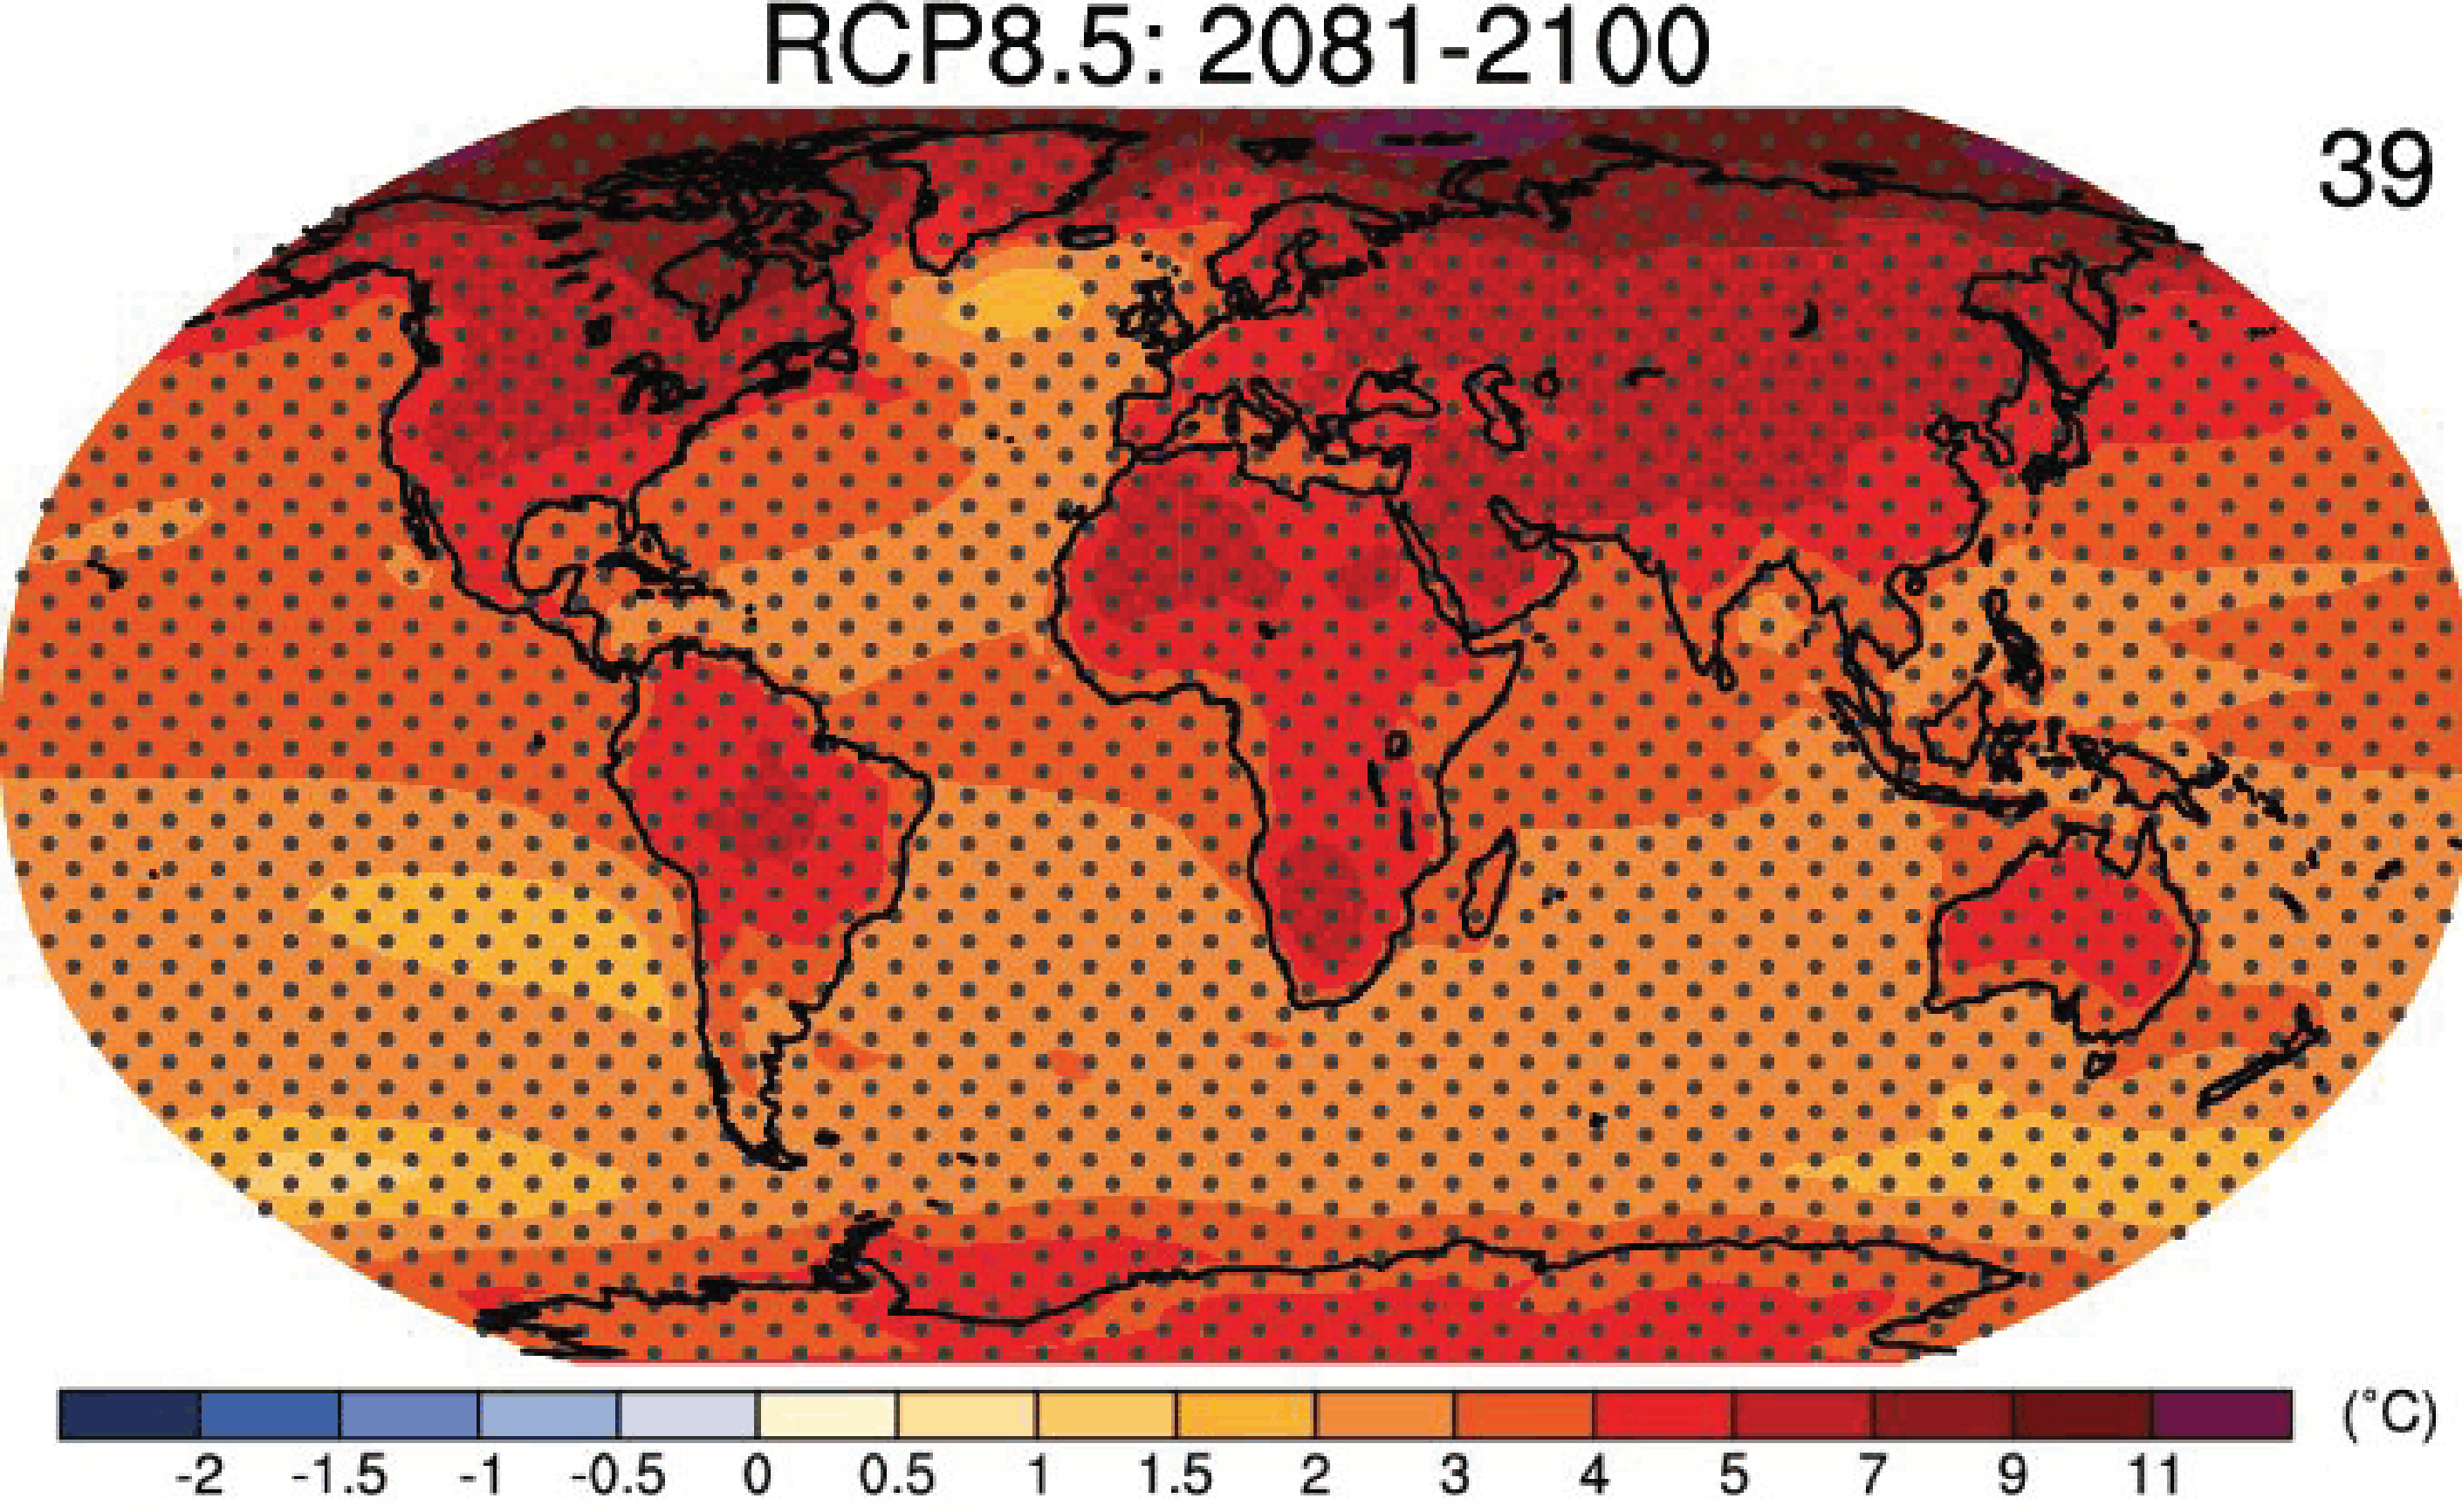 Surface temperature changes projected for the business-as-usual scenario RCP8.5 at the end of the 21st century. Stippling indicates regions of highly significant changes, where the multi model mean is larger than two standard deviations of modeled internal variability and where at least 90% of models agree on the sign of the change. Click on the map to see projections for other scenarios and times. From ipcc.ch.